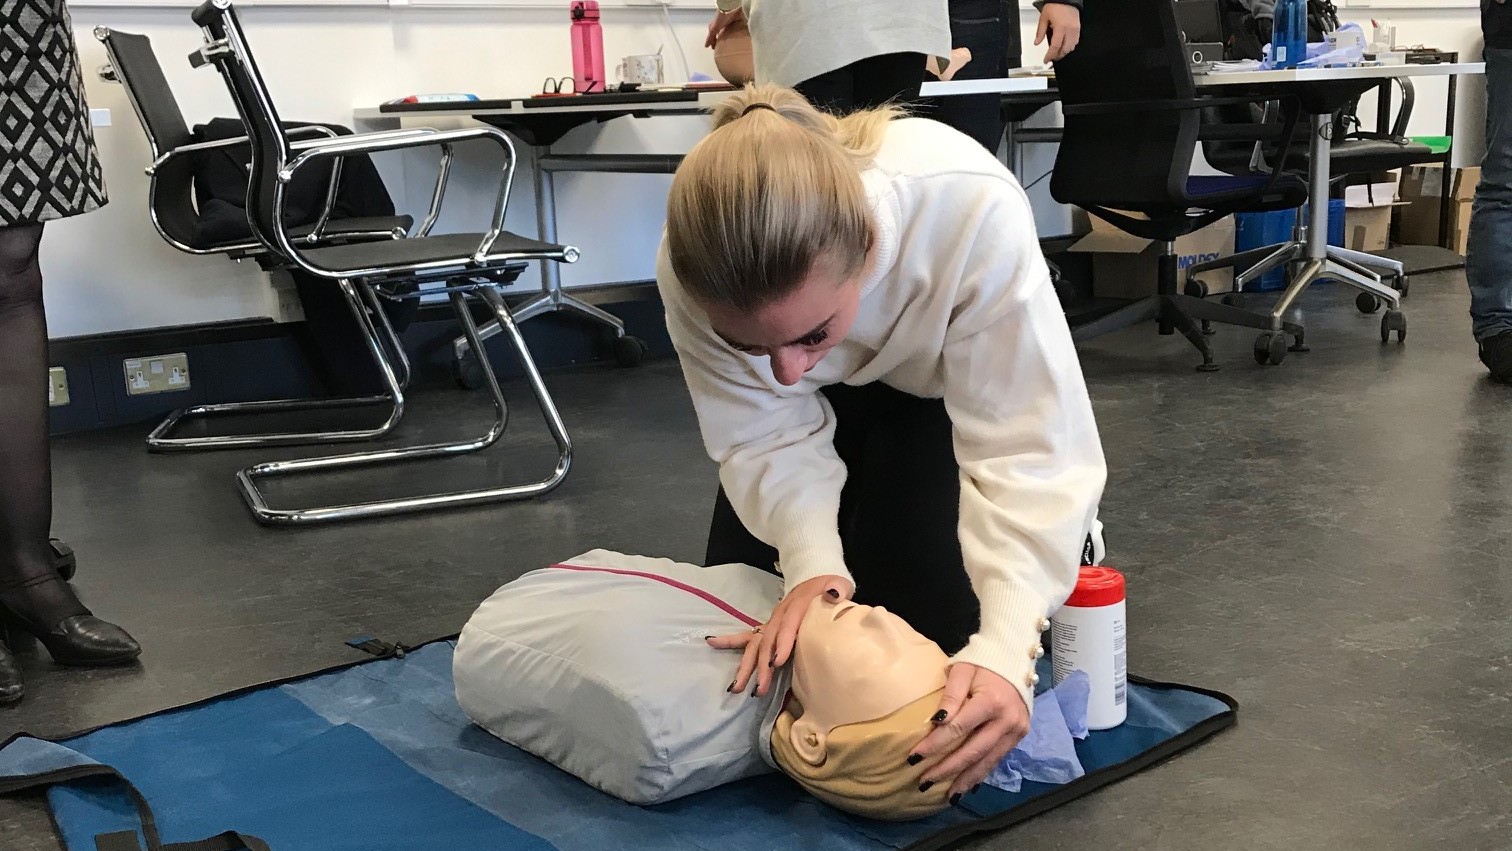 Fire Aid CPR demonstration